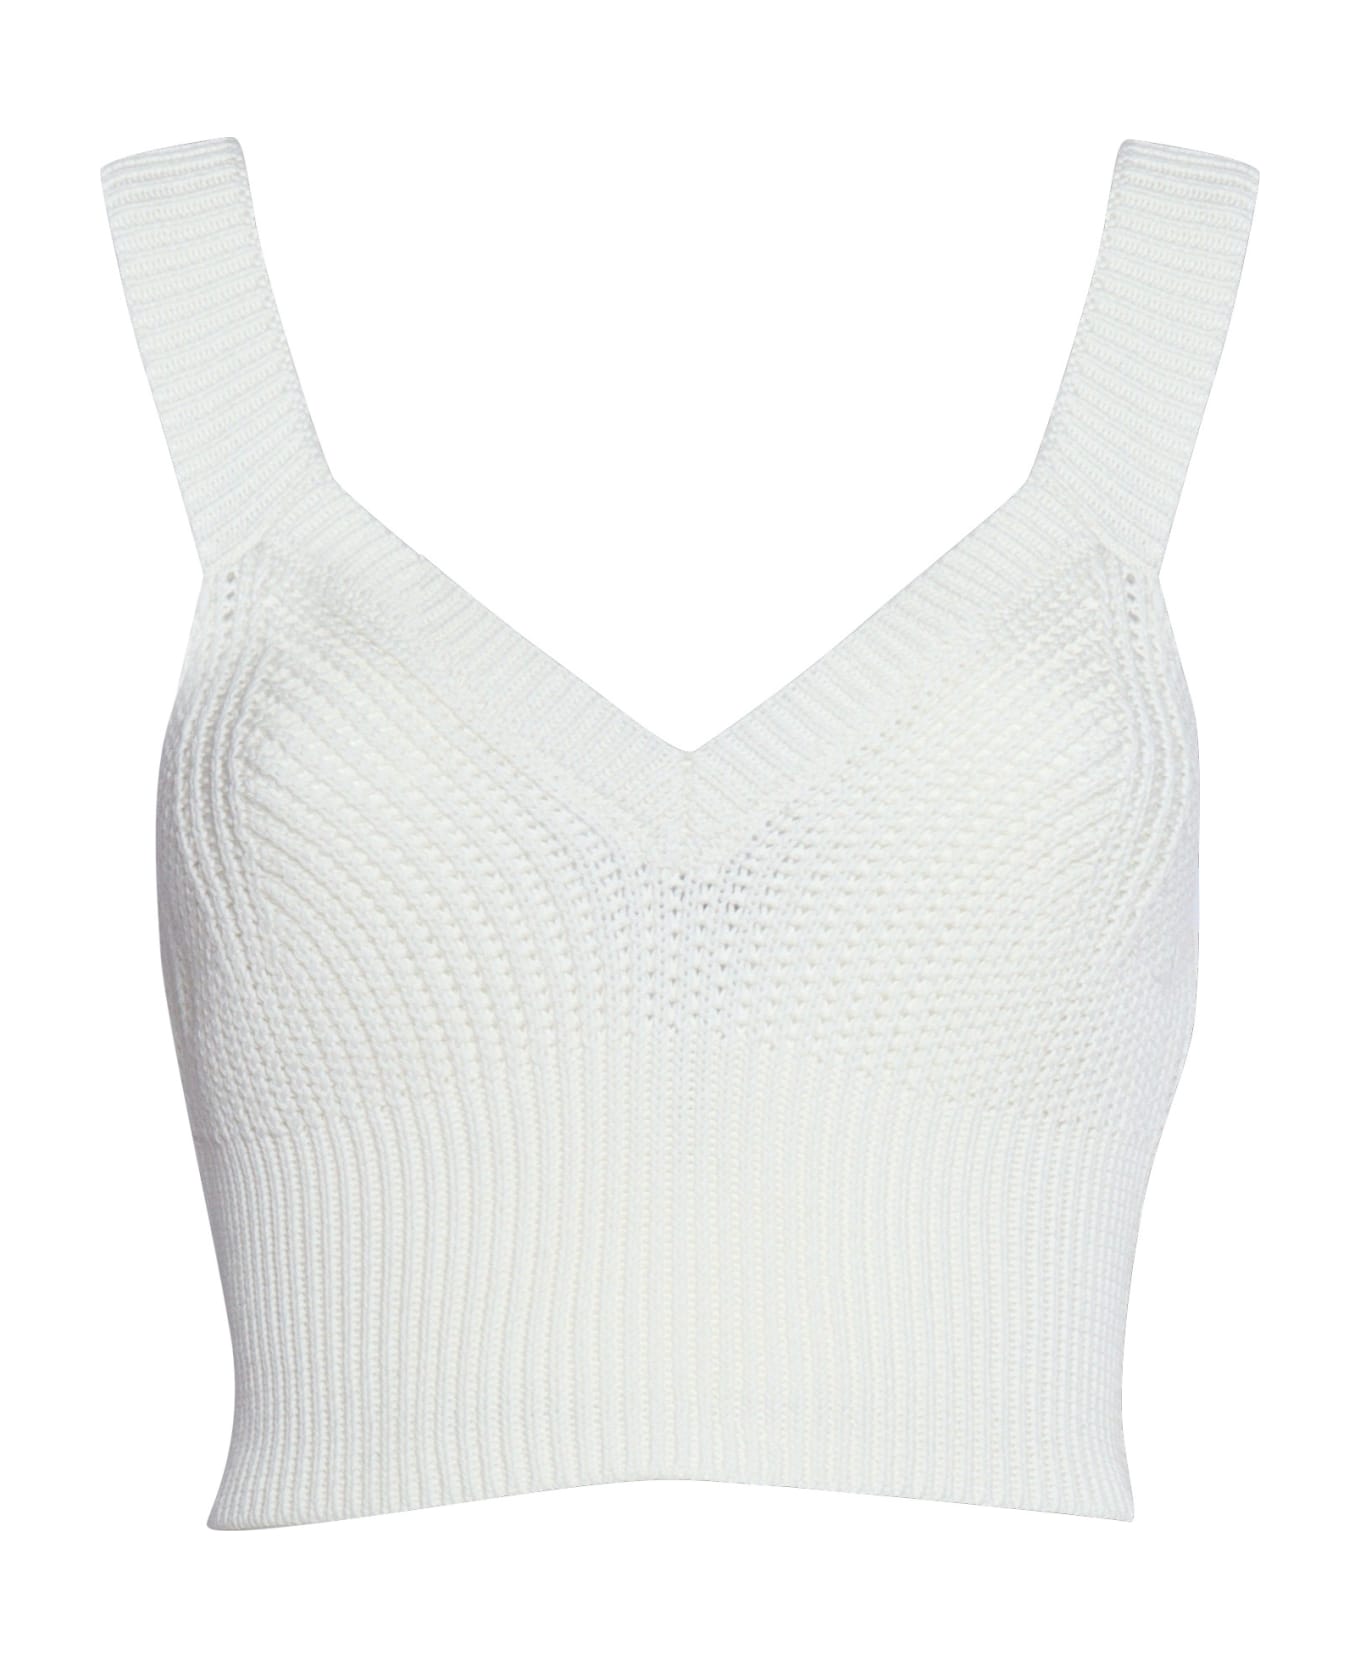 Ballantyne Withe Perforated Top - WHITE ブラウス